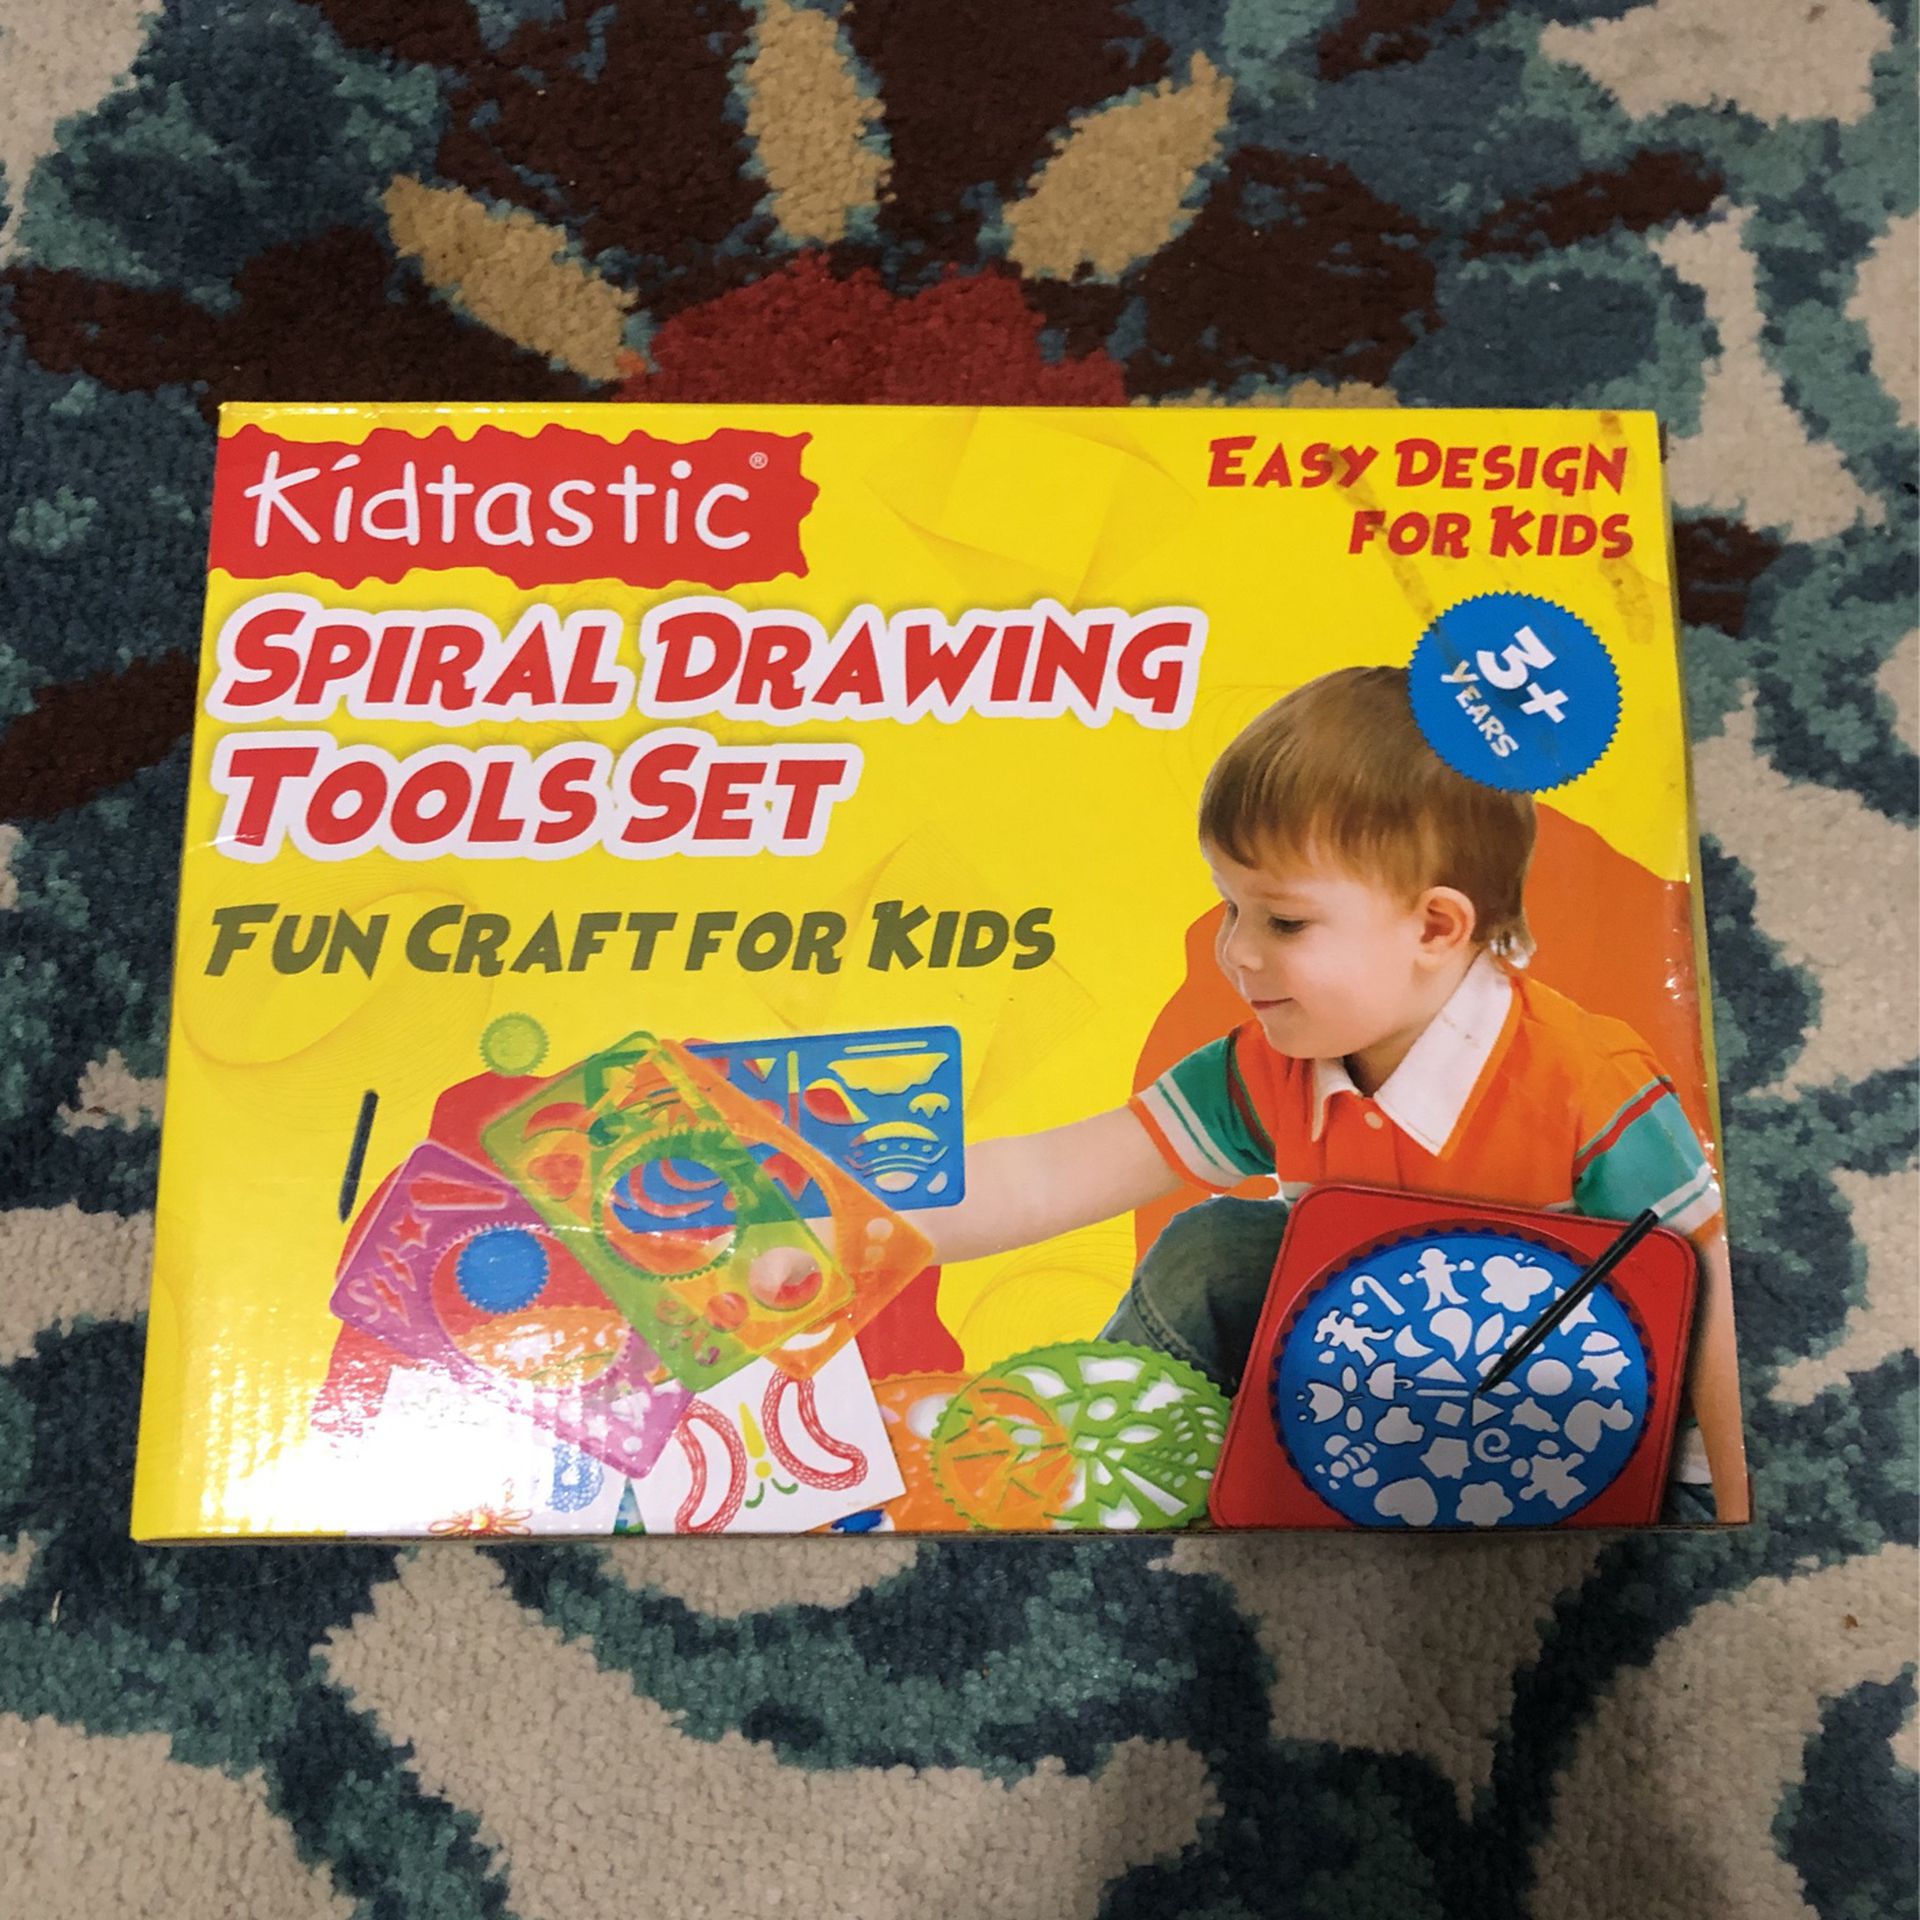 Brand new in box never opened Kids spiral drawing tools set